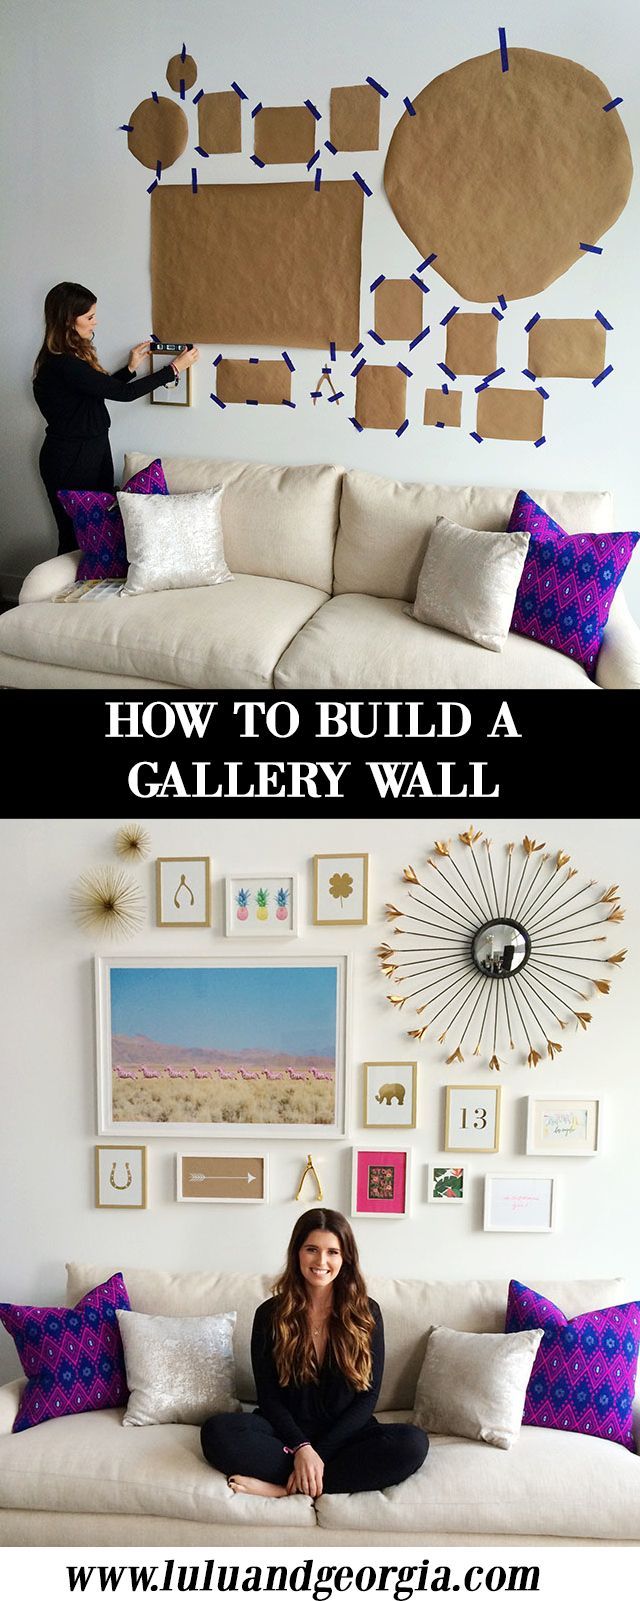 HOW TO: Building a Gallery